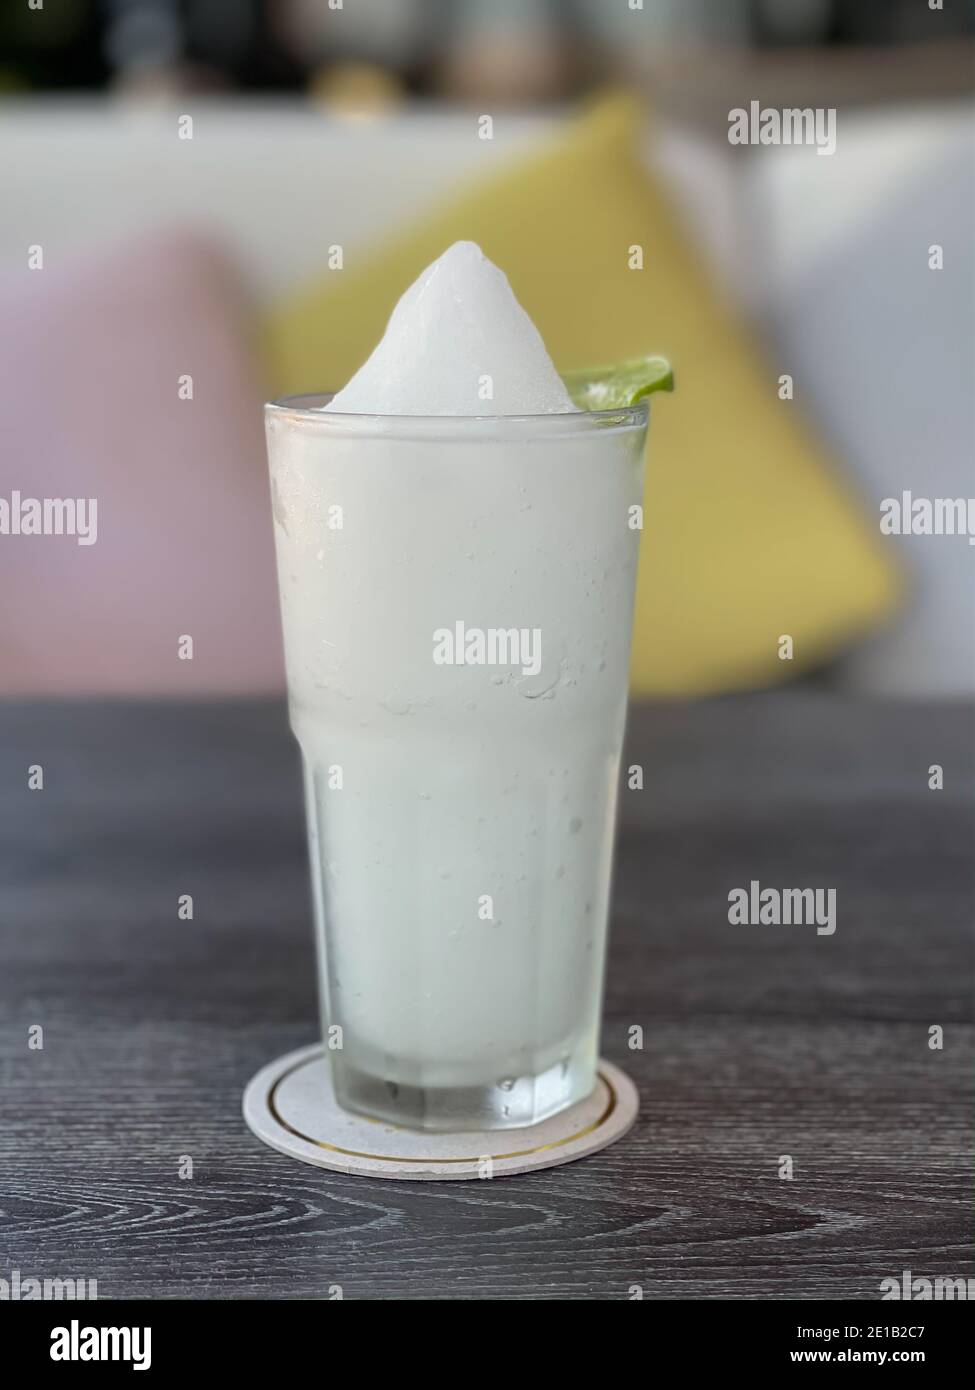 Lime smoothie in glass on grey table, stock photo Stock Photo